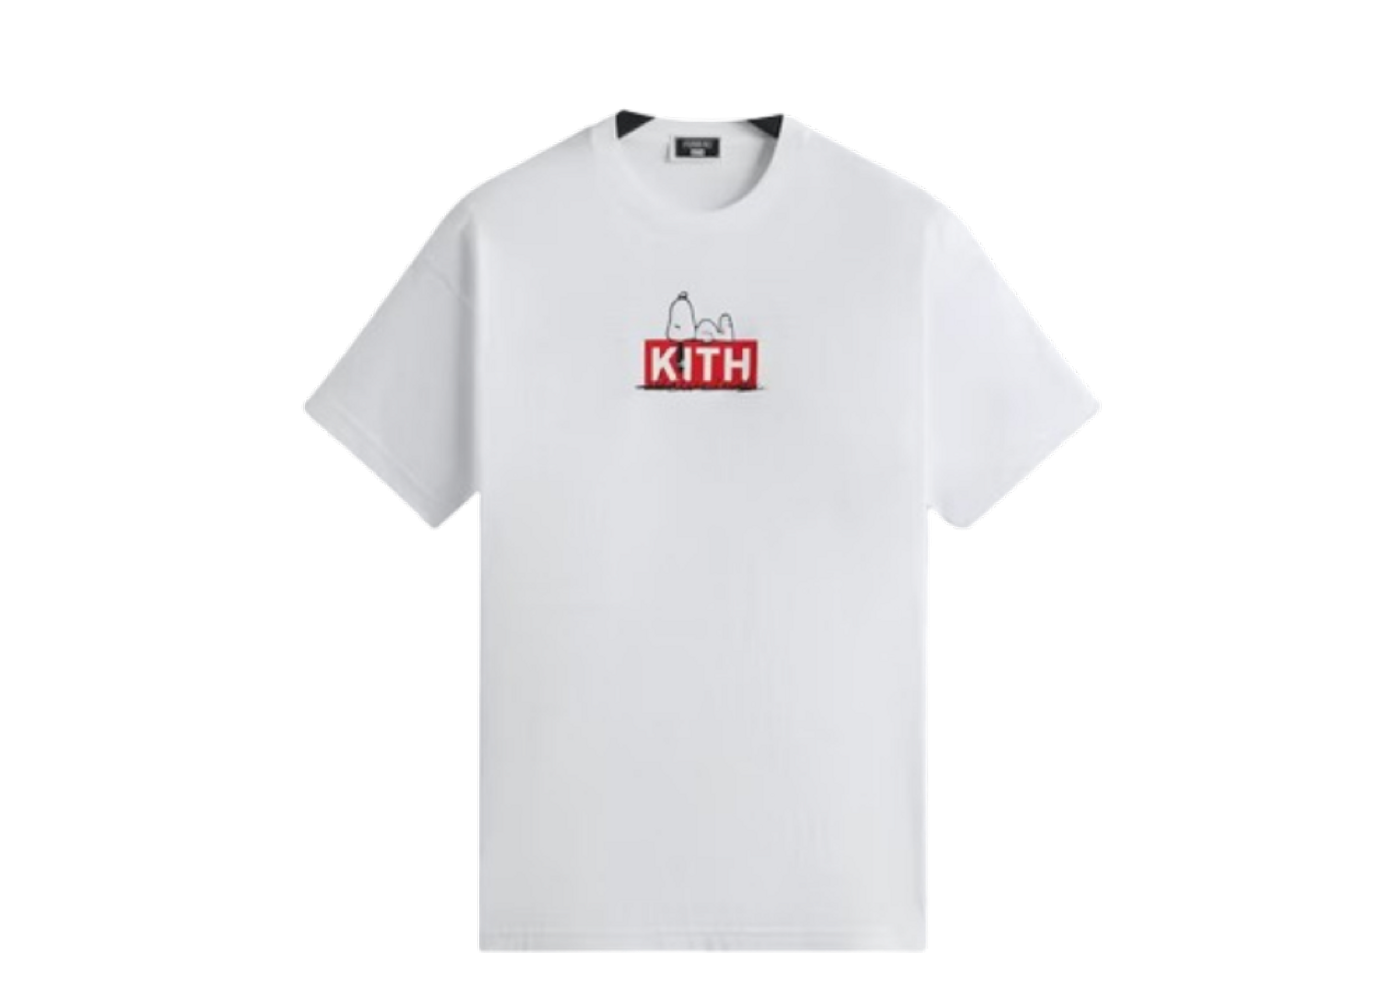 KITH Kith for Peanuts Doghouse Tee【即完売品】100%Cotton ...